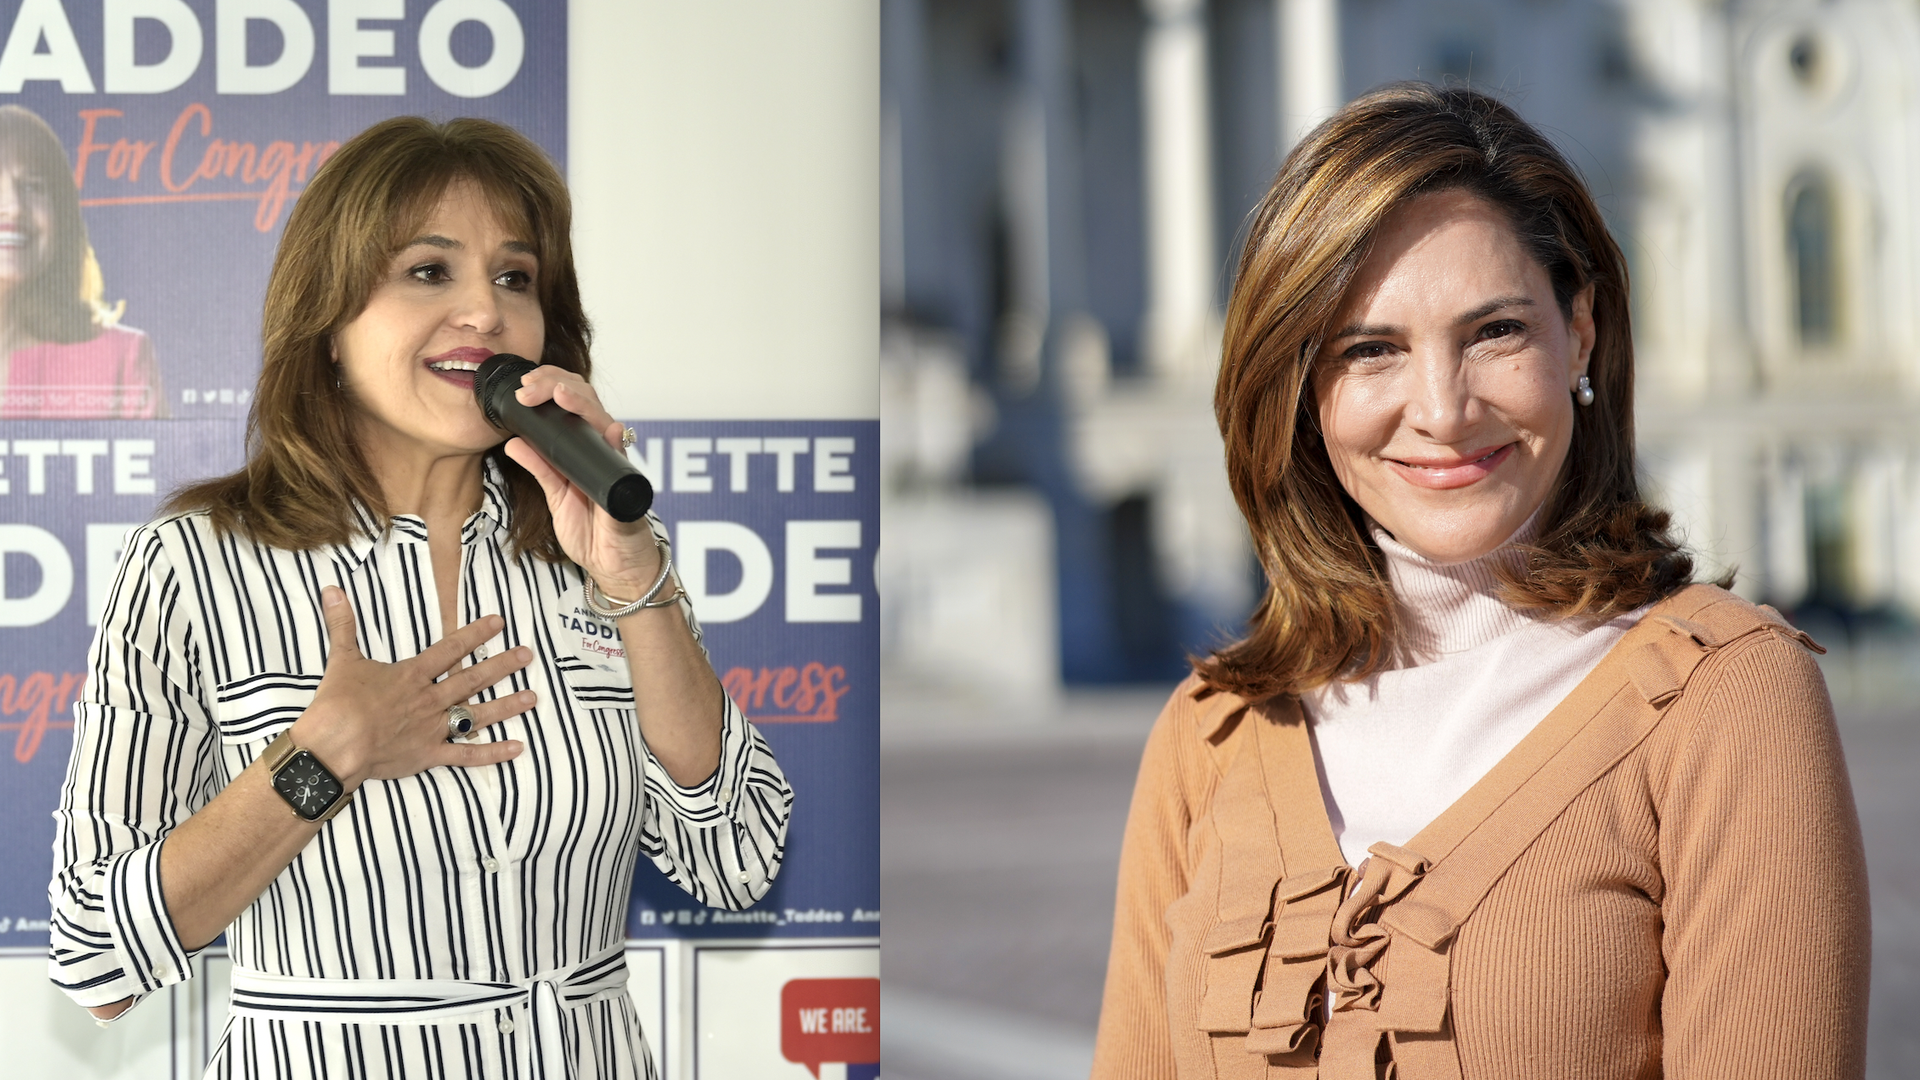 Democratic challenger Annette Taddeo and US Representative Maria Elvira Salazar (R-FL) side by side in two different photos.